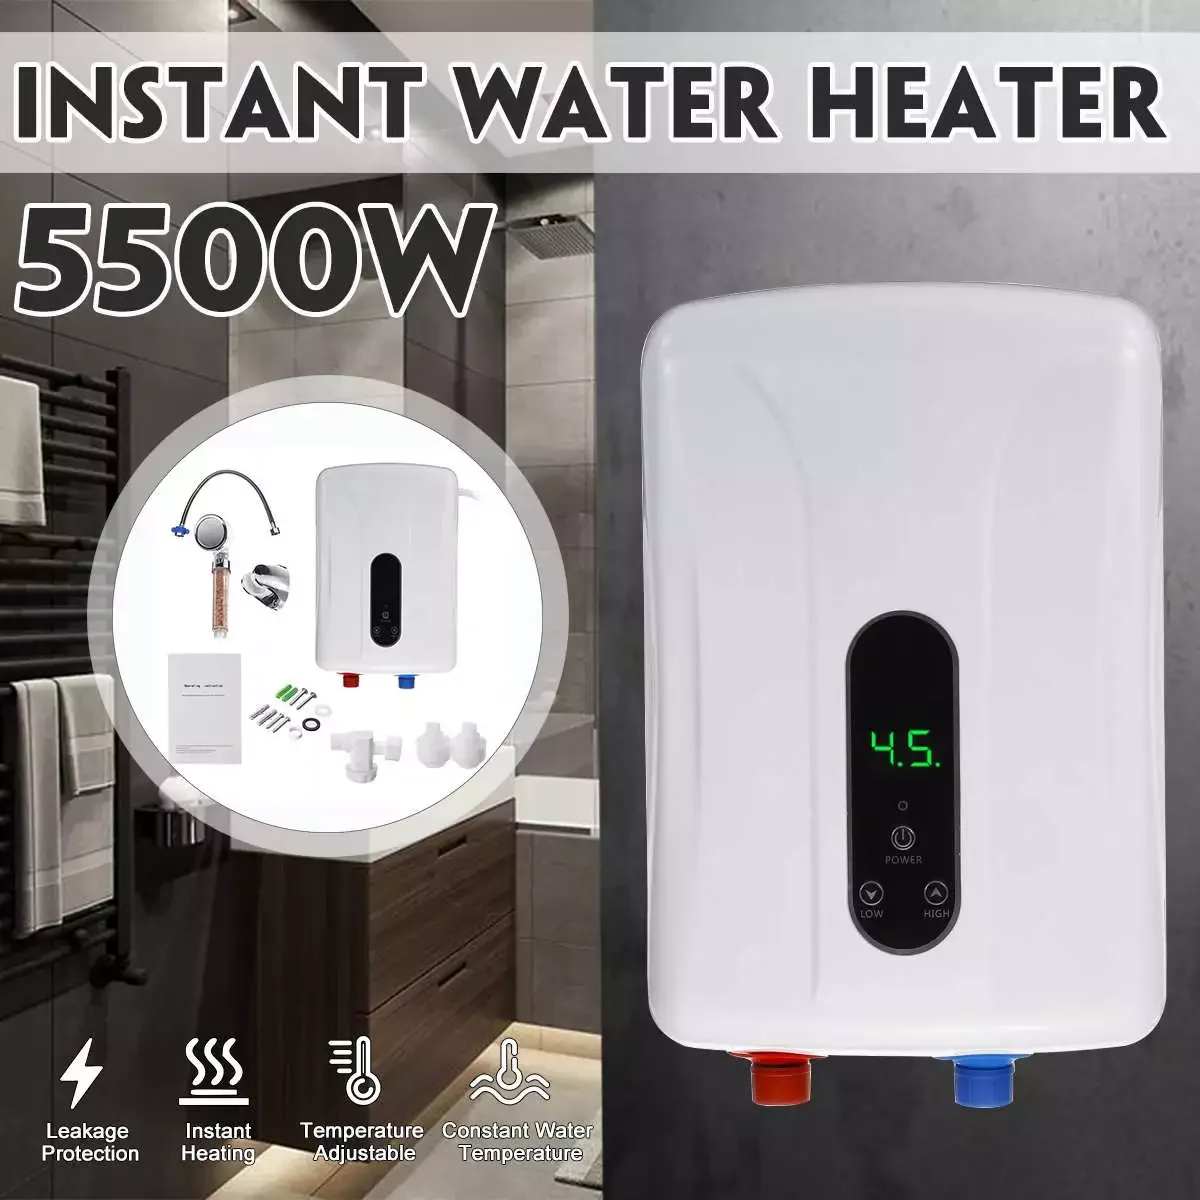 5500W 220V Instant Electric Water Heater Bathroom Kitchen Smart Touch Tankless Water Heater Temperature Display Heating Shower enlarge